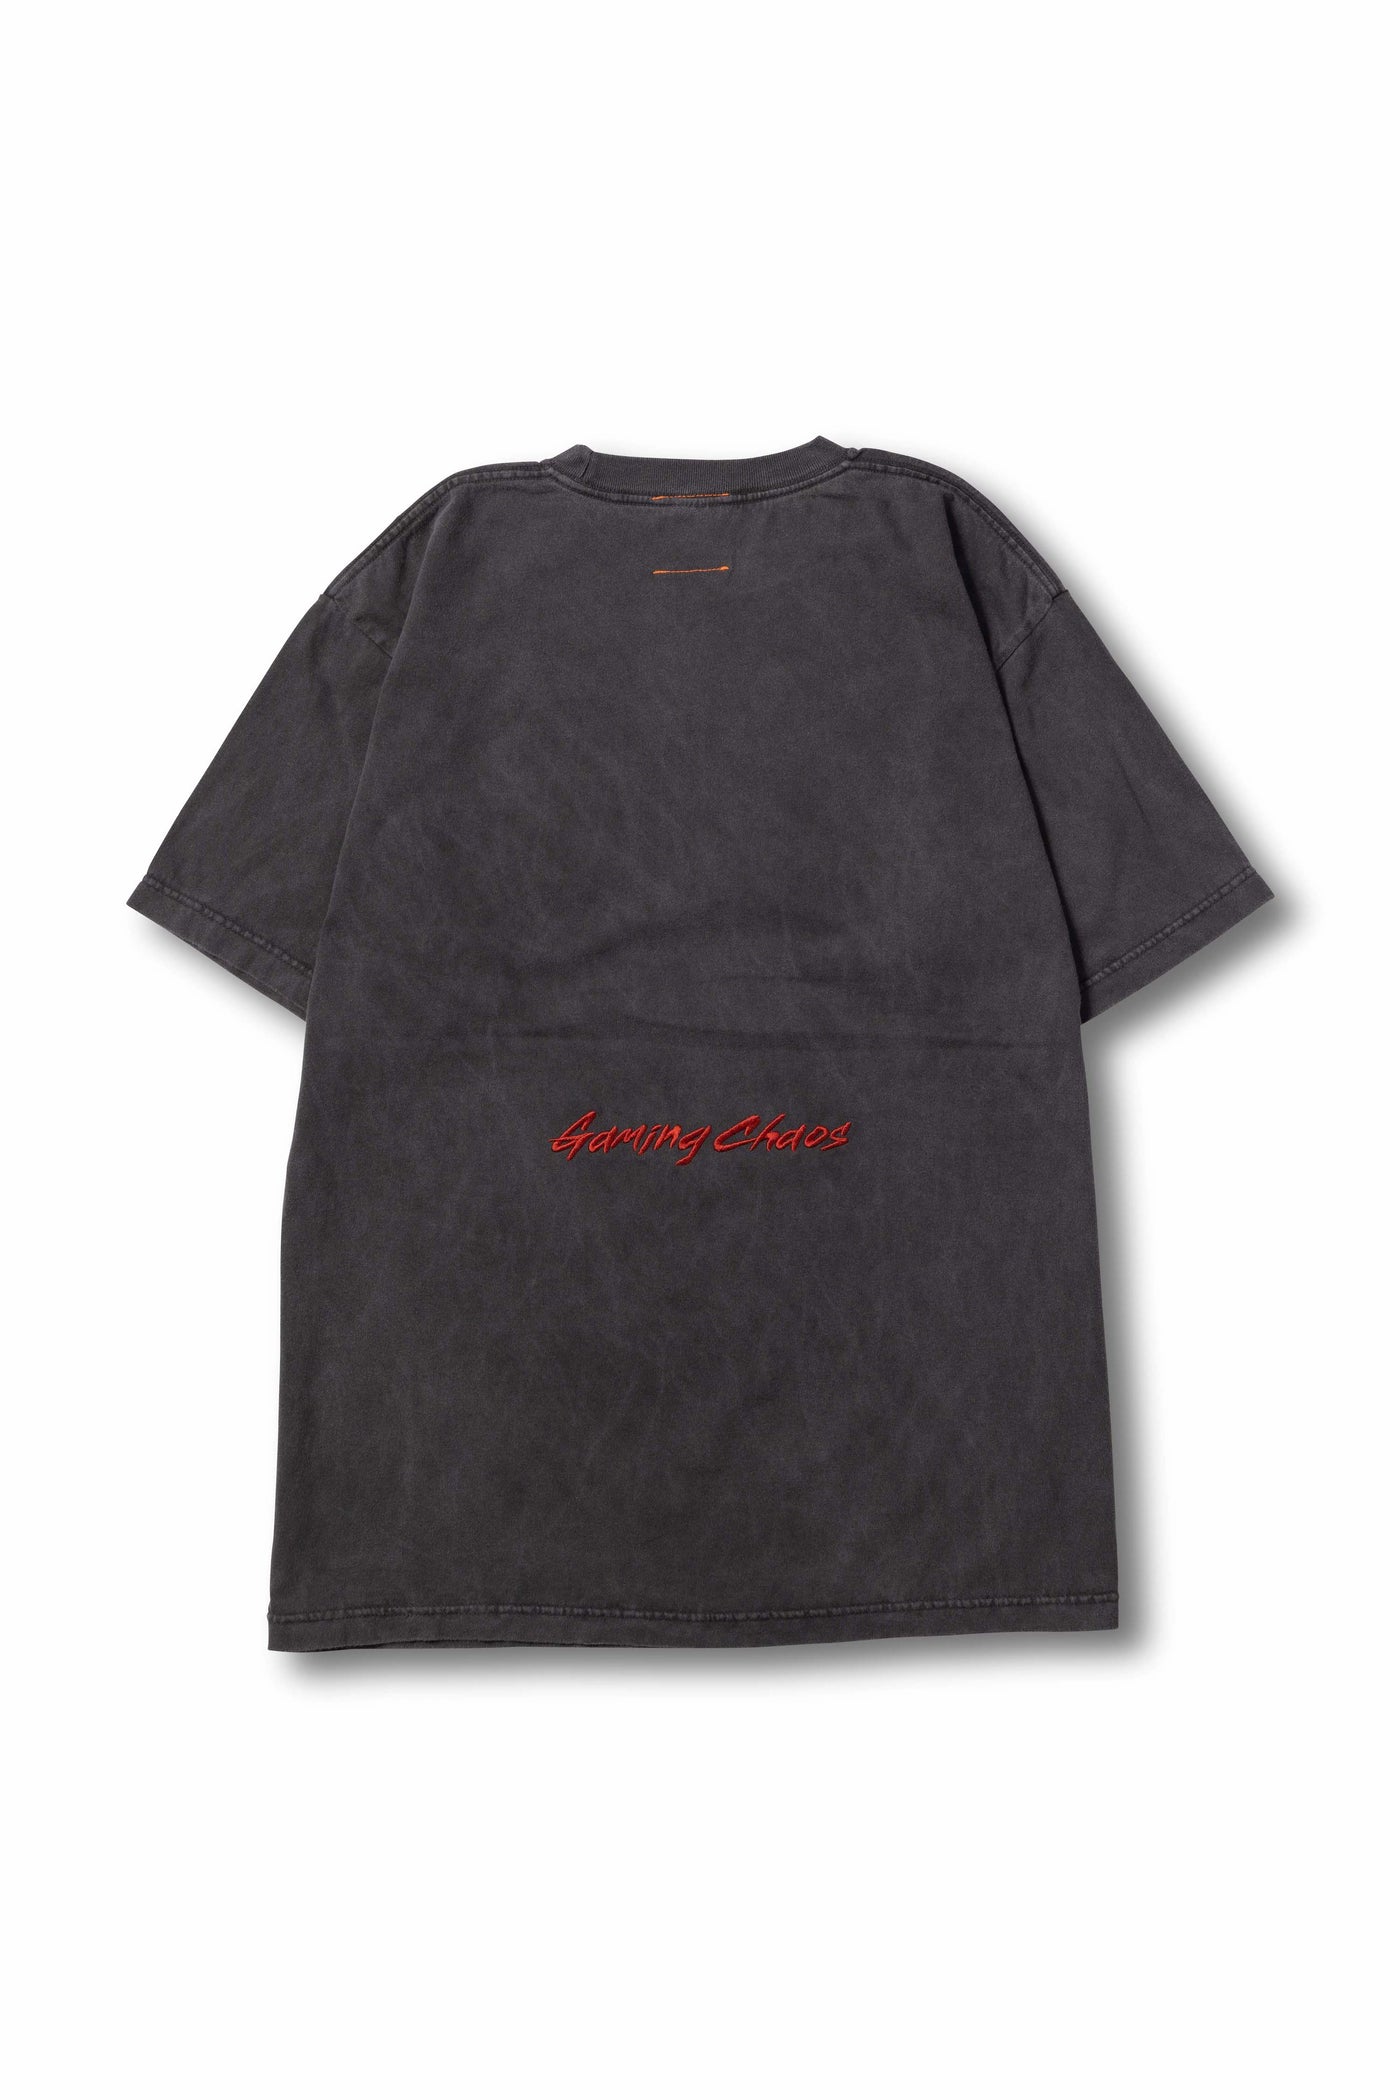 L vaultroom GAMING CHAOS TEE / CHARCOAL - Tシャツ/カットソー(半袖